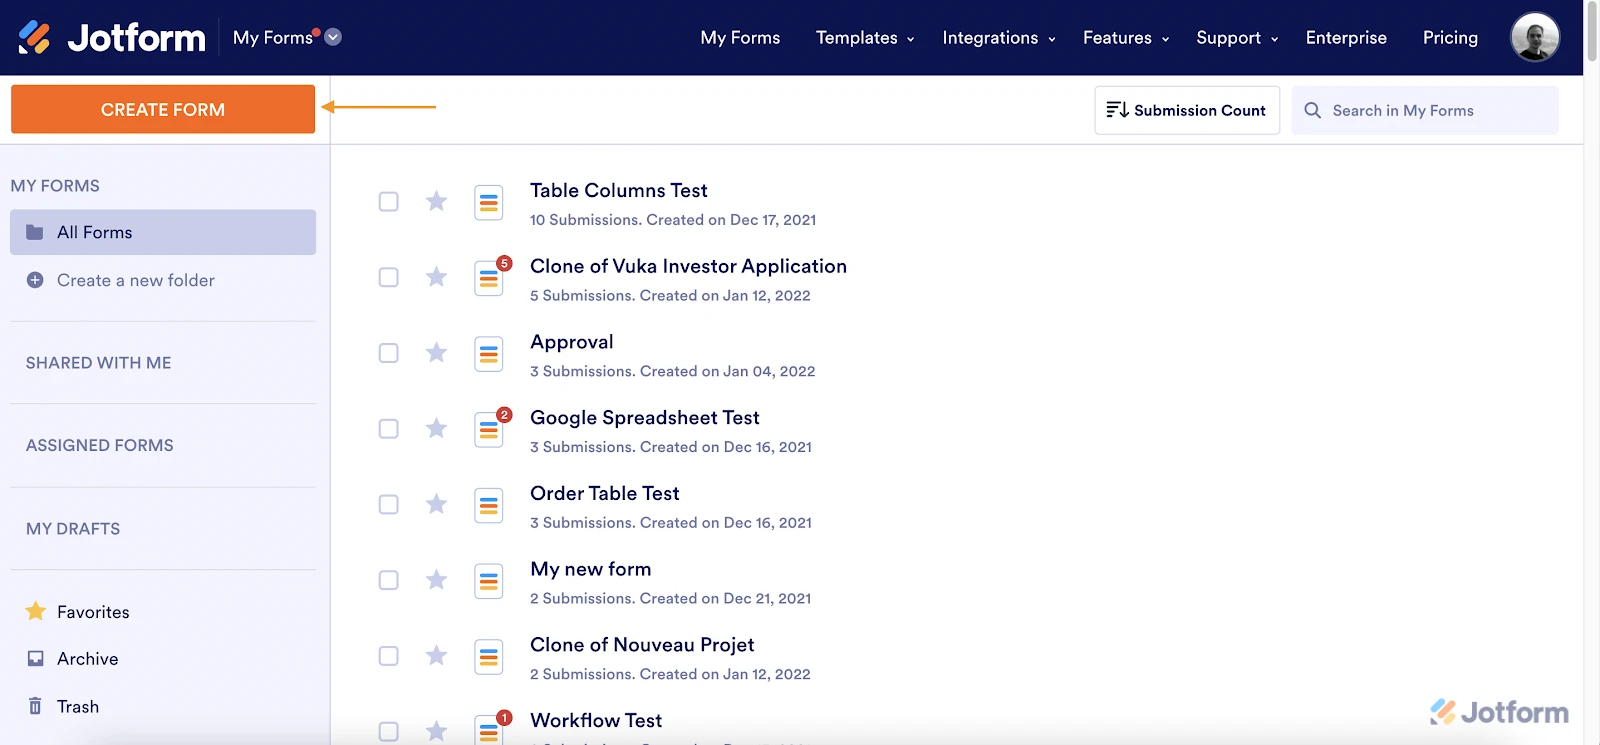 Can I sell the apps/forms I create to clients? Image 1 Screenshot 40